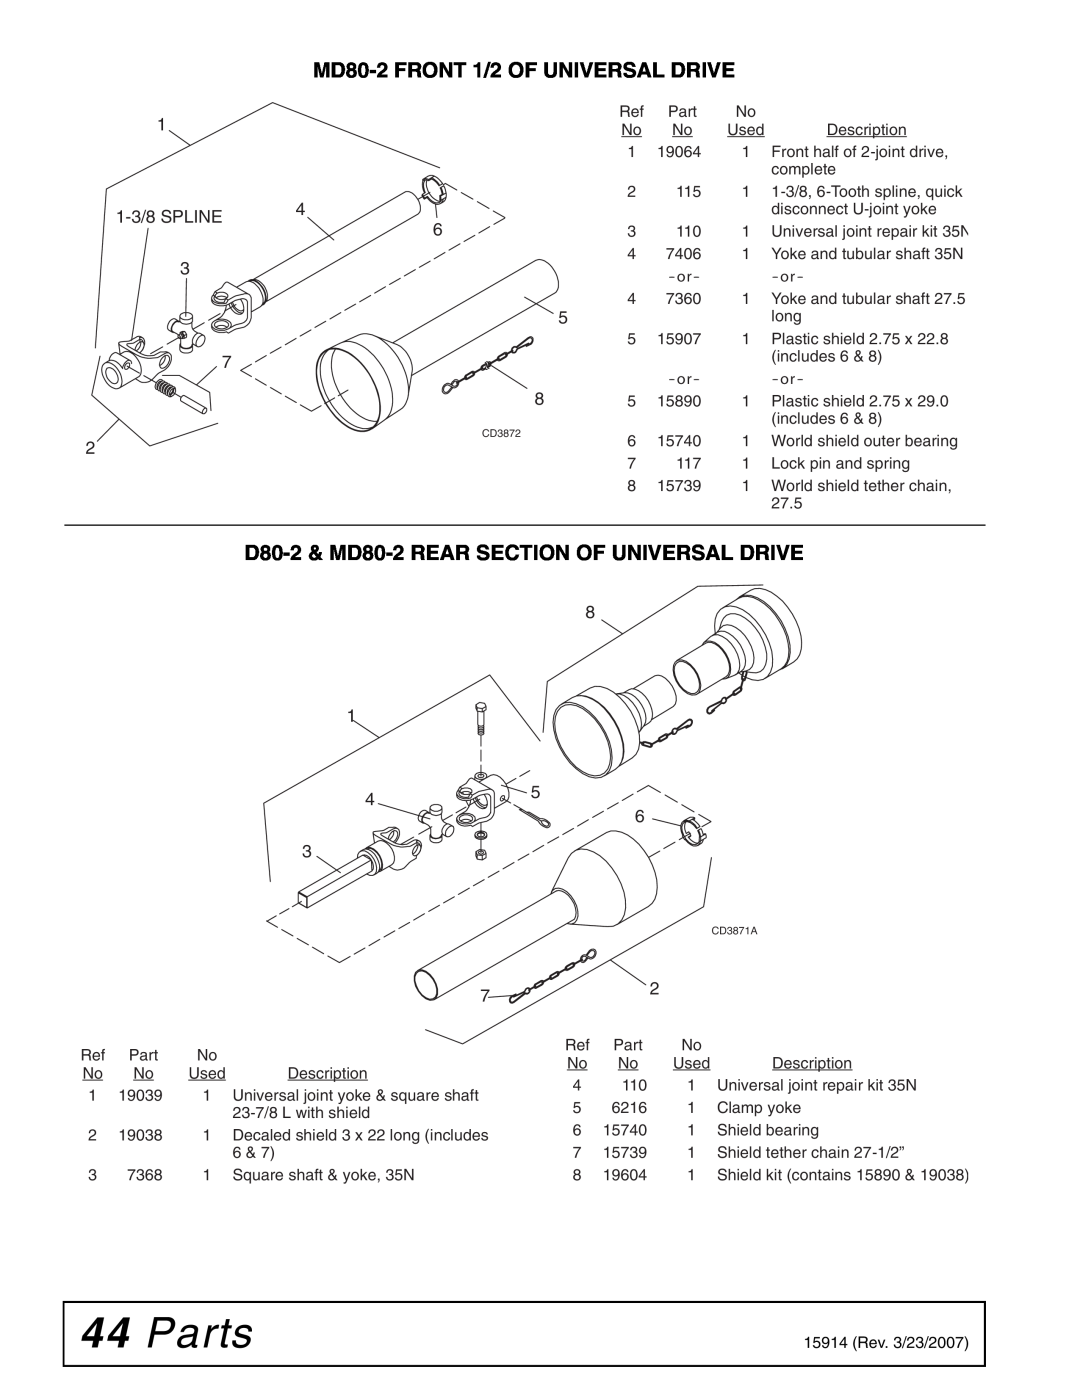 Woods Equipment manual Parts, MD80-2FRONT 1/2 OF UNIVERSAL DRIVE, D80-2& MD80-2REAR SECTION OF UNIVERSAL DRIVE 